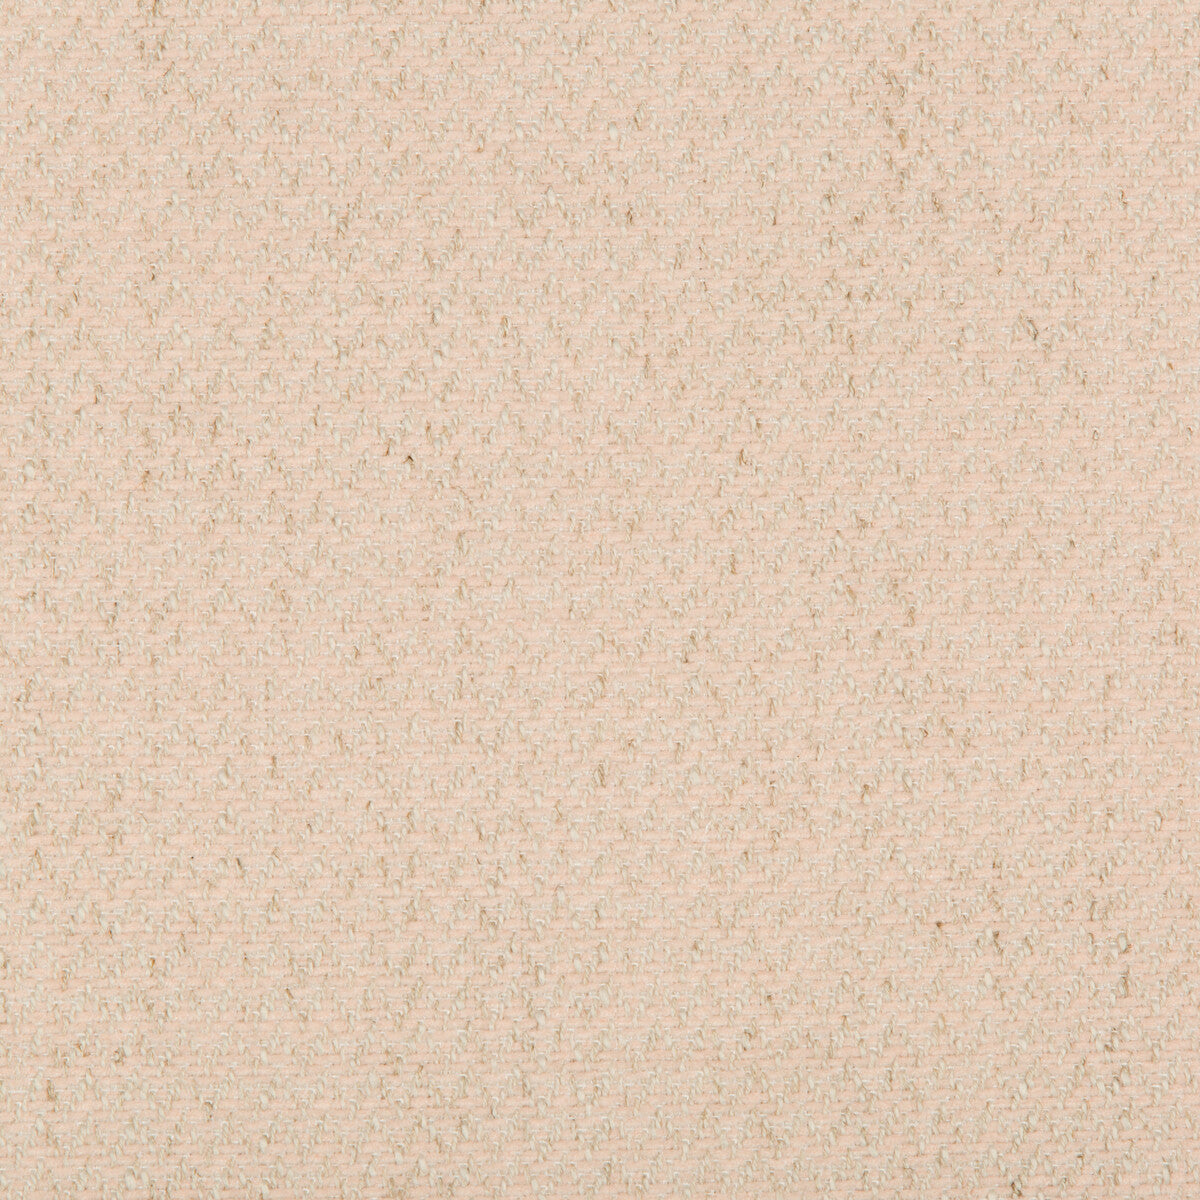 Kravet Smart fabric in 35394-17 color - pattern 35394.17.0 - by Kravet Smart in the Performance Crypton Home collection